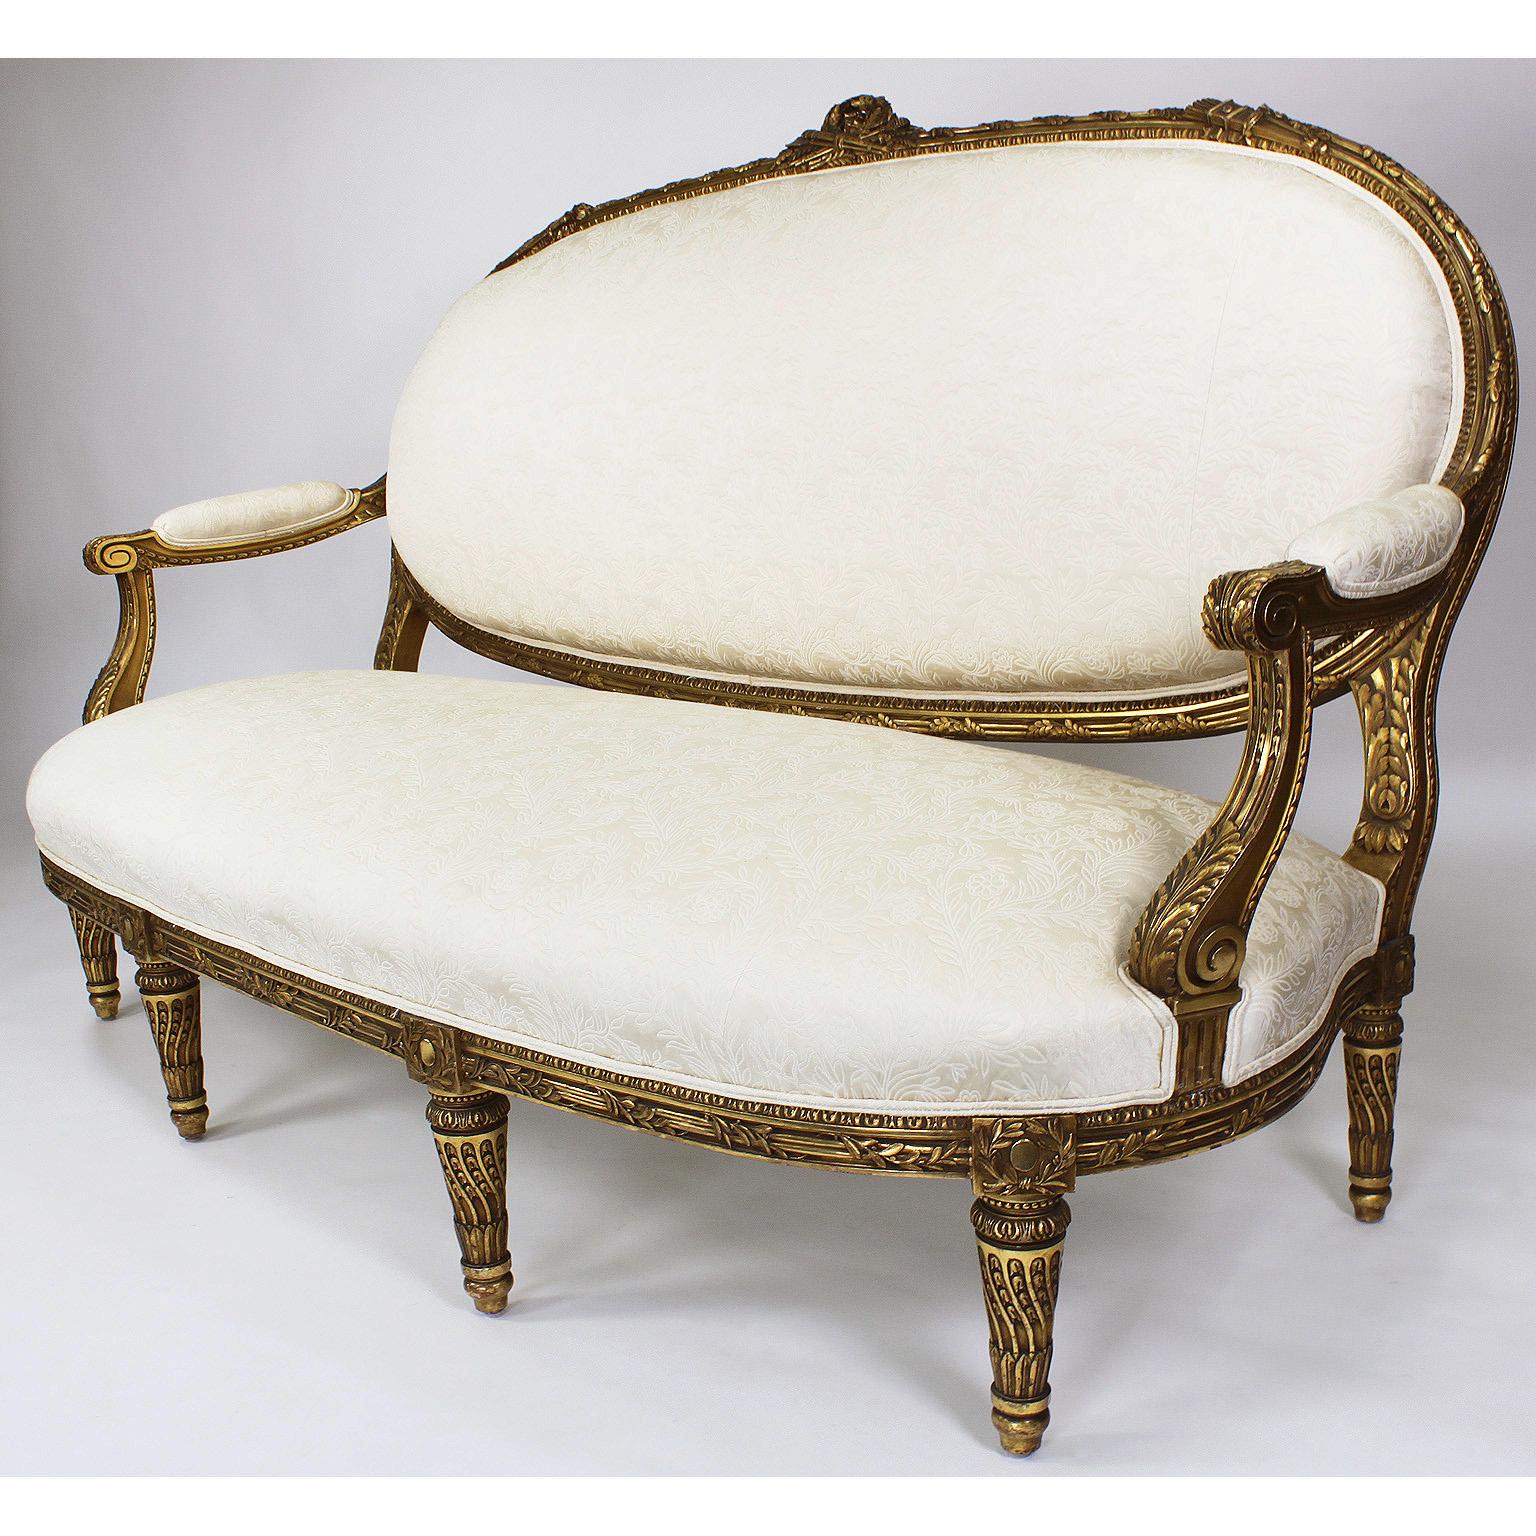 A very fine french 19th-20th century Louis XVI style giltwood carved settee by François Linke (d. 1946). The finely carved frame, upholstered in a recent cream fabric, topped with an allegorical carving of musical instruments within a wreath,